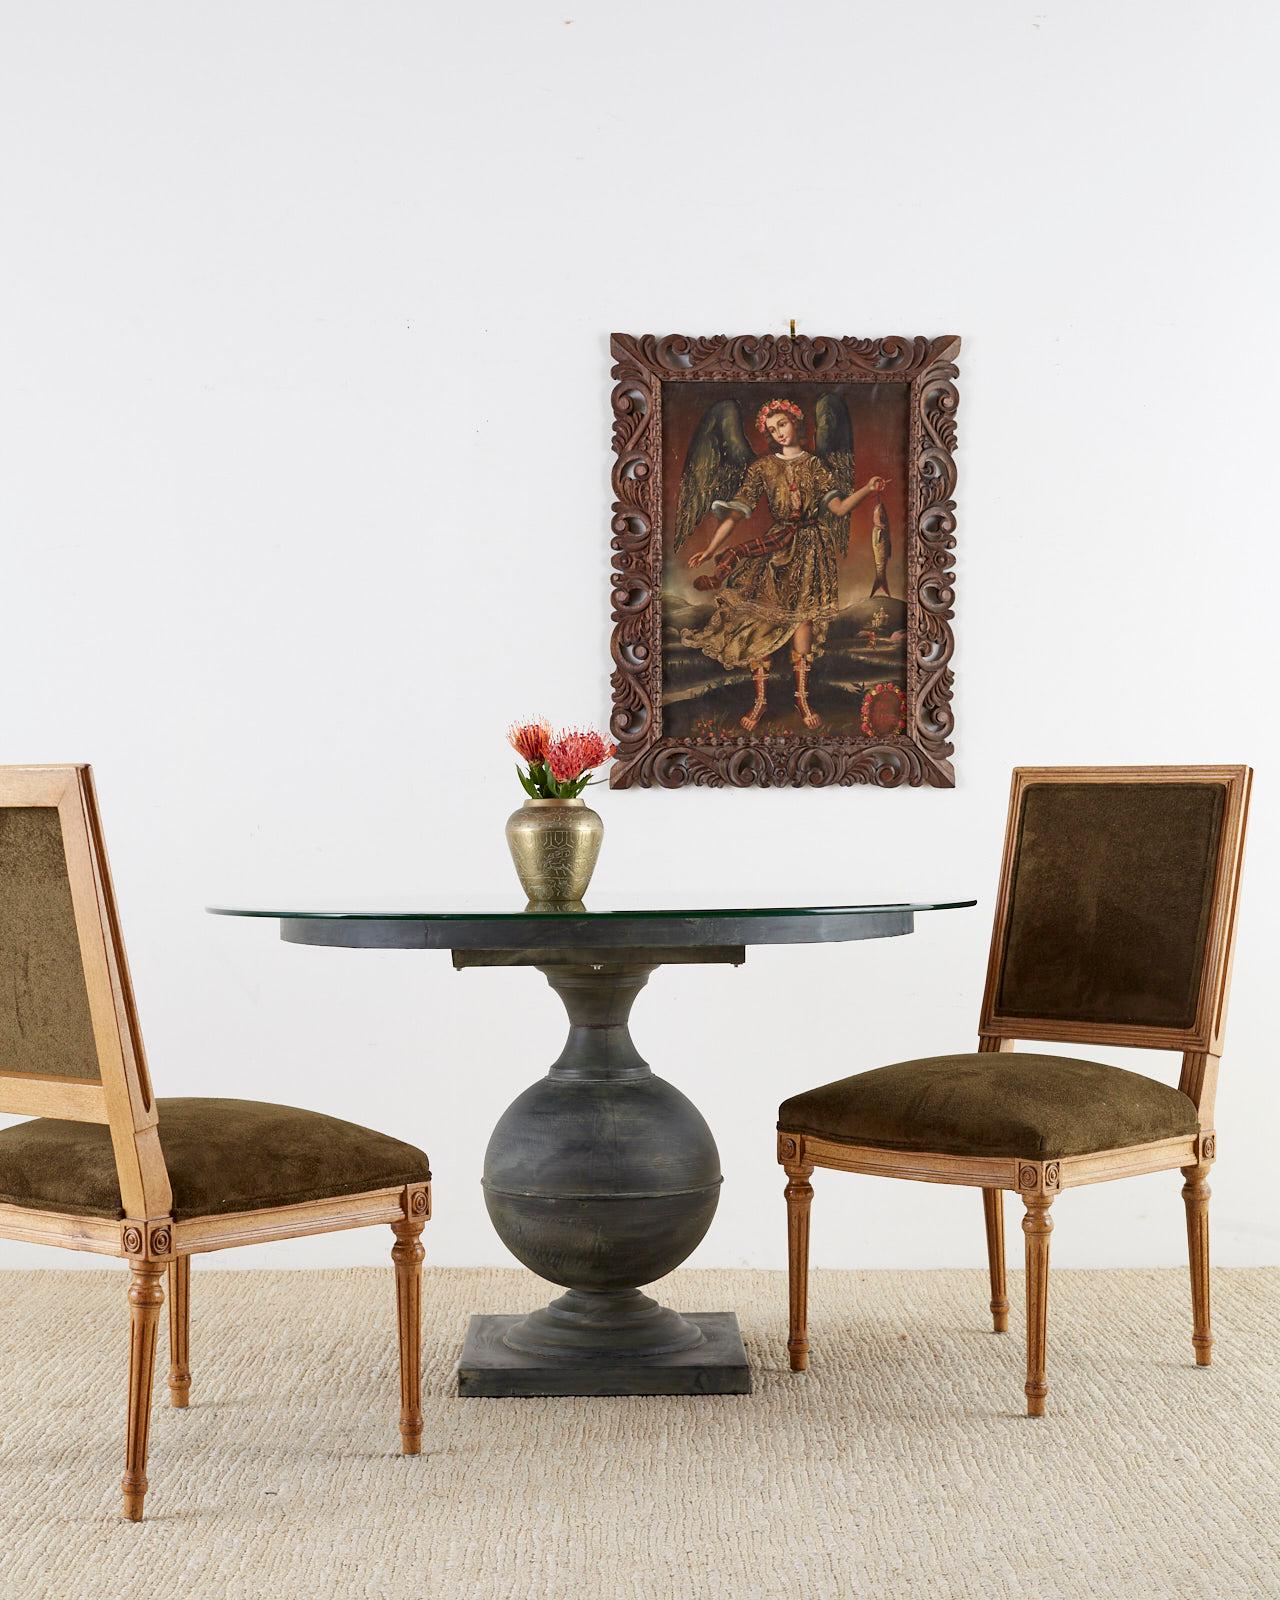 Peruvian 20th century Spanish Colonial Cuzco school style religious painting of Arcangel San Rafael. Oil on canvas painting that is part of a small collection of three. Rich colors and imagery set in a hand carved Peruvian wood frame. Image measures